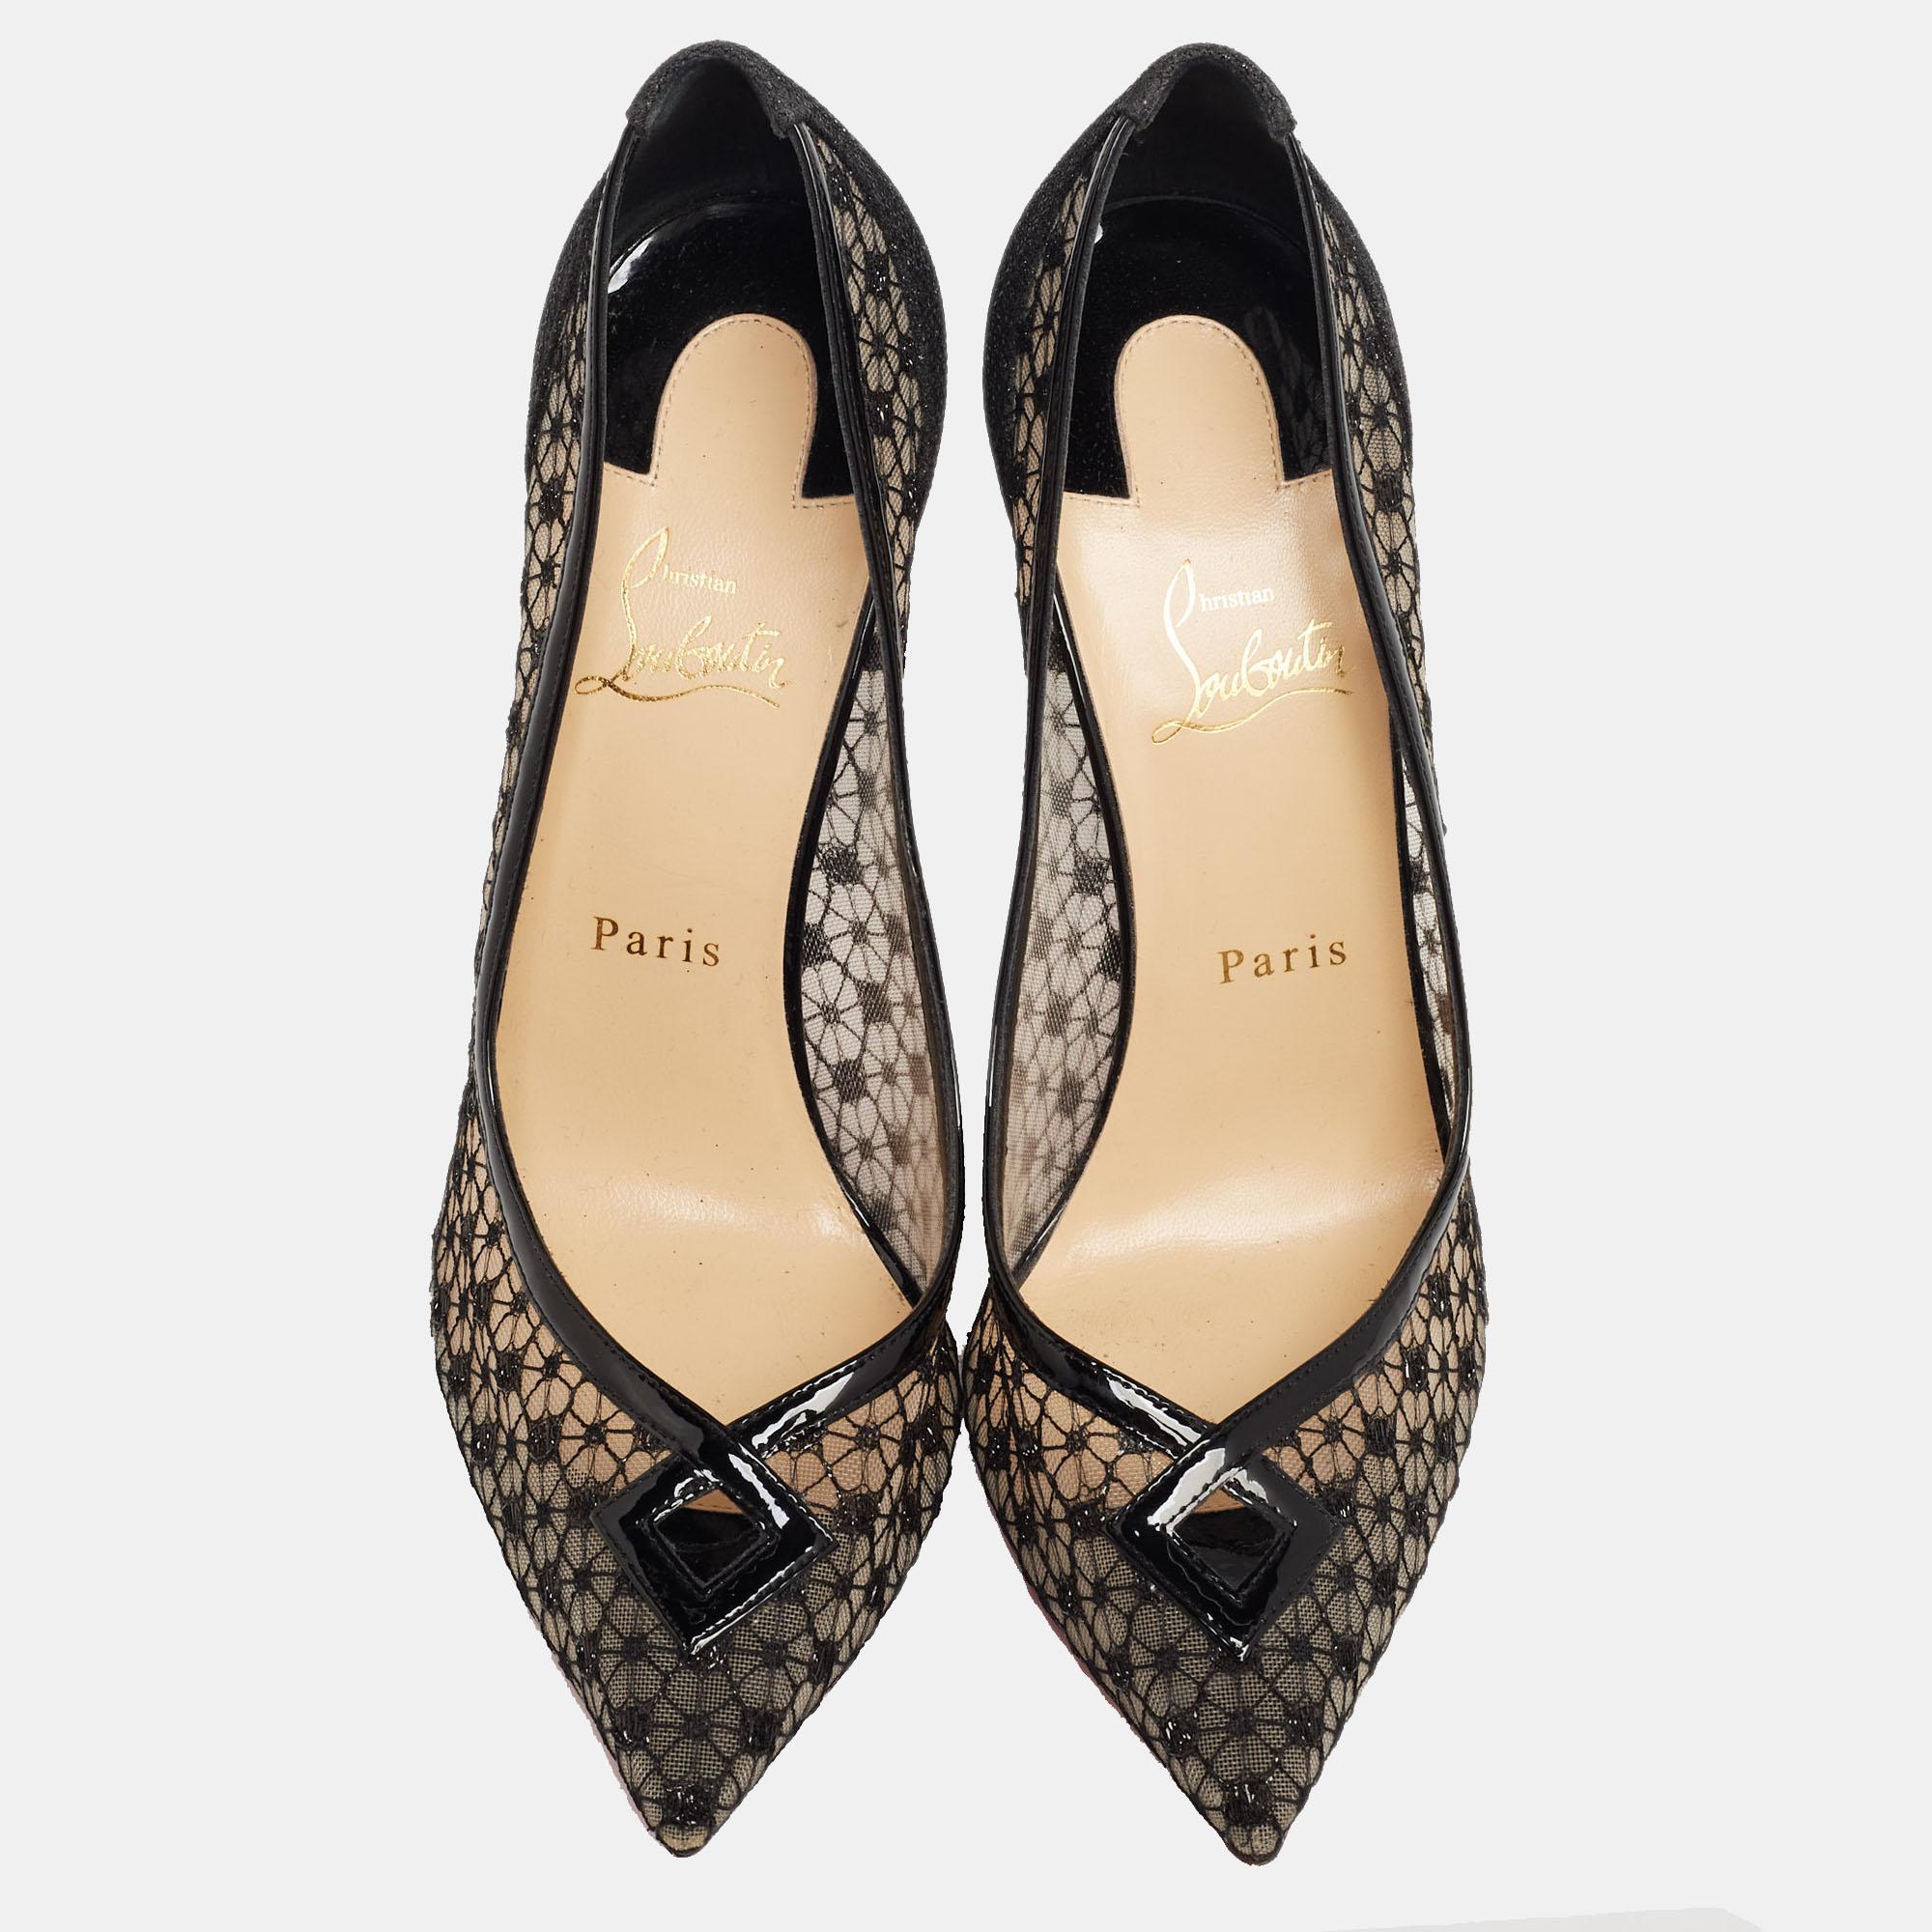 These timeless pumps feature pointed toes and 11.5 cm stiletto heels, creating a beautiful arch. They are rendered in black mesh and lace that gently envelopes the foot creating elegant lines to complement any outfit. These Christian Louboutin